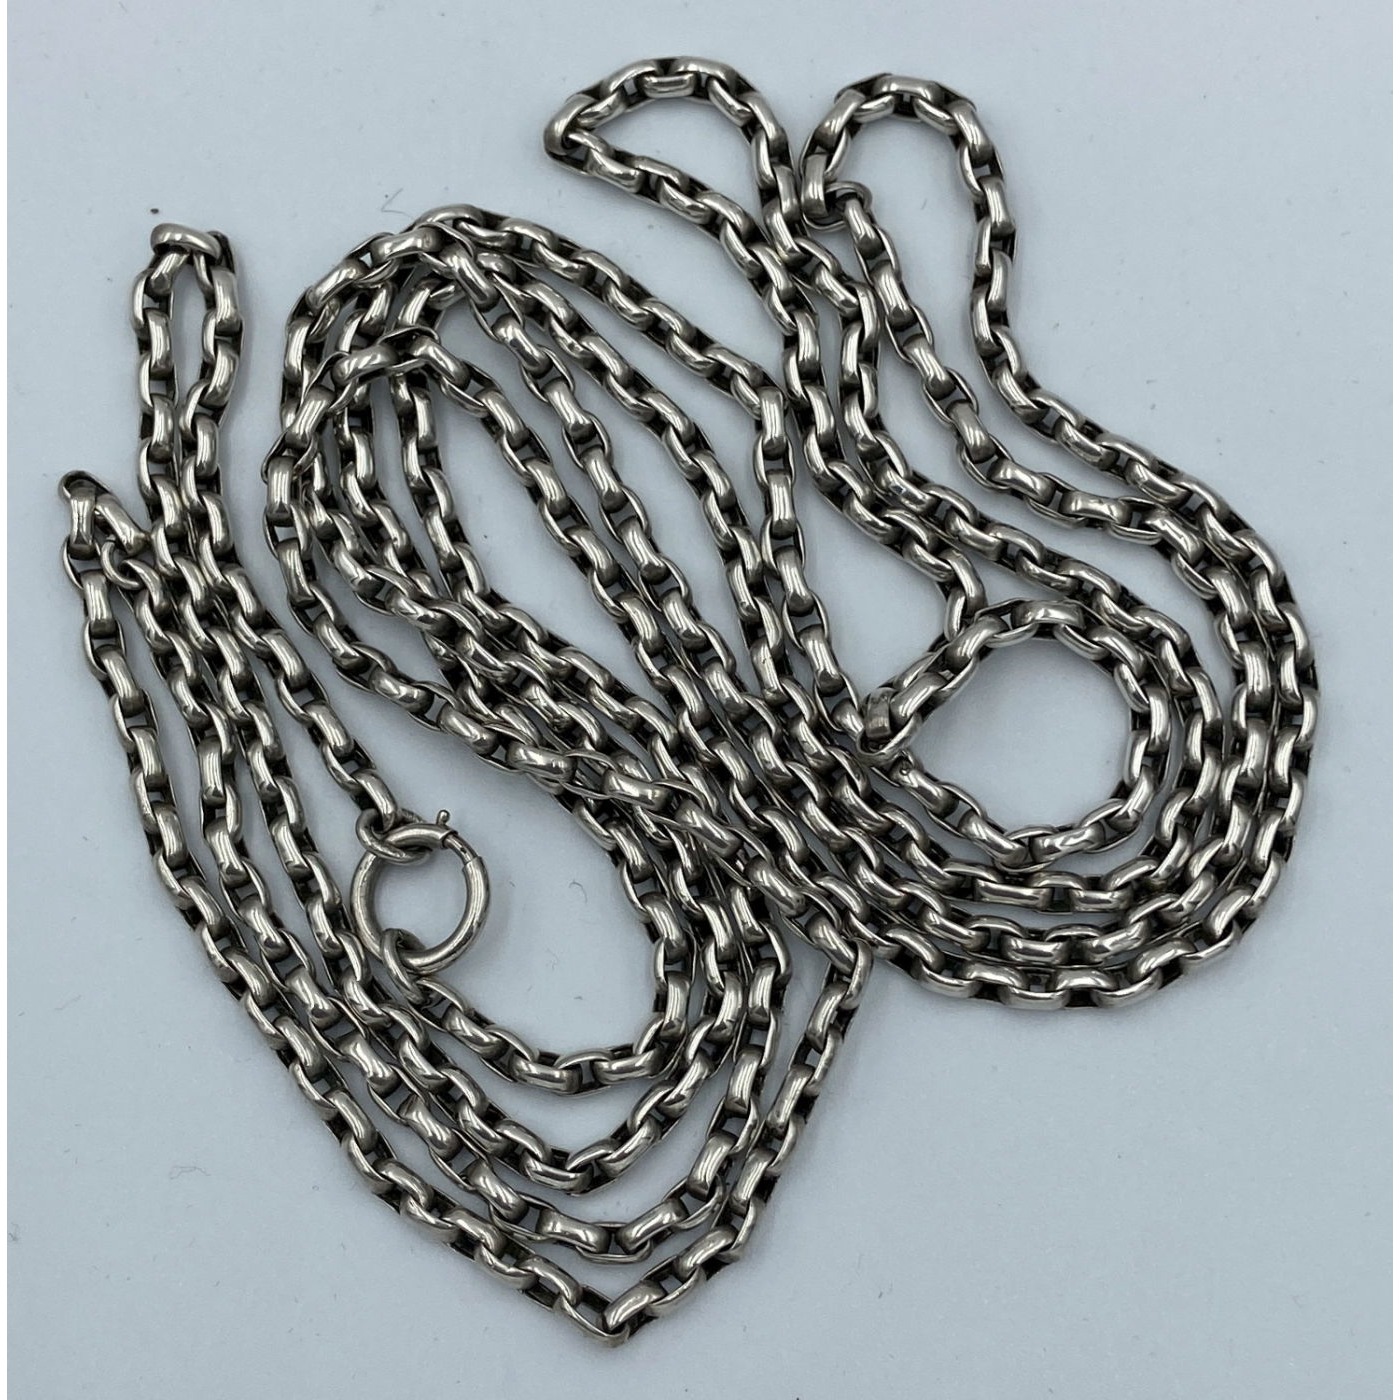 Outstanding 60" Early English Sterling Silver Wheat Link Chain